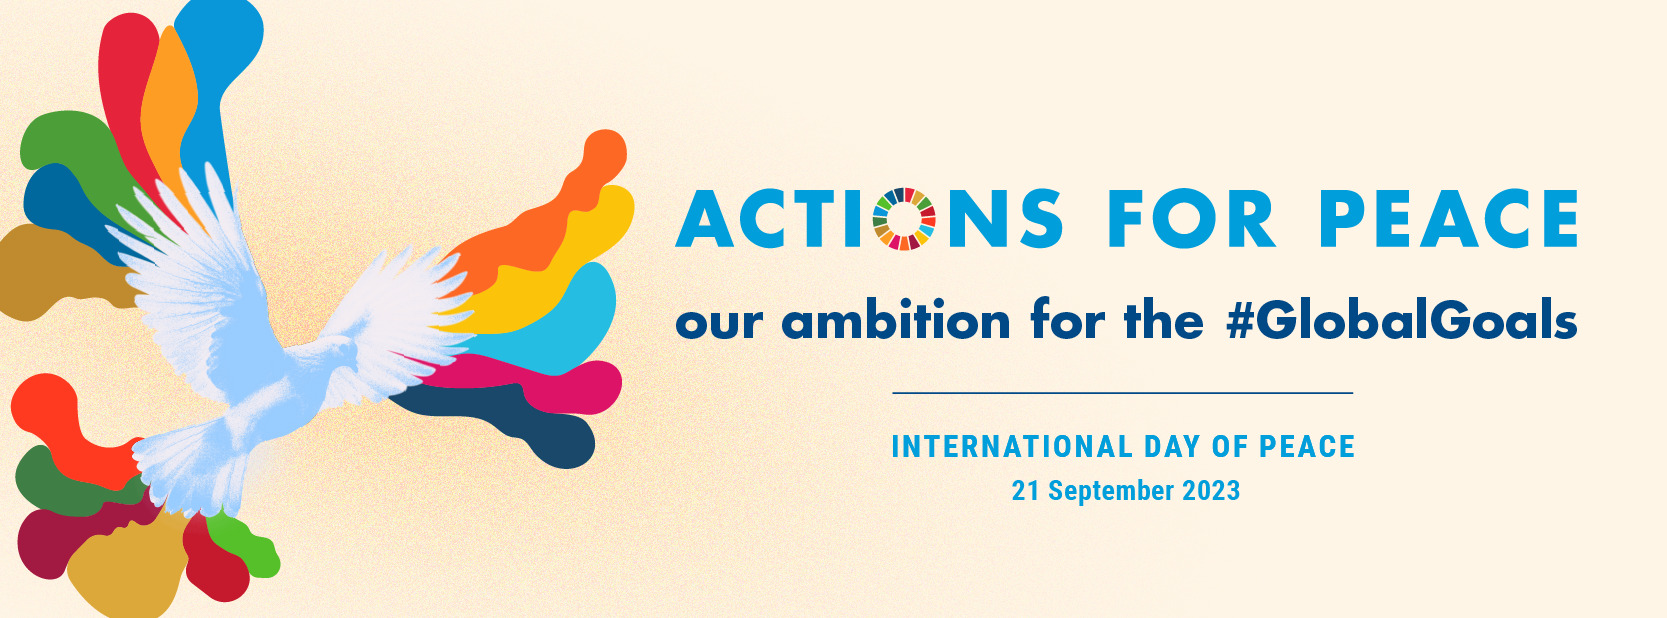 International Day of Peace logo. Reads Actions for Peace, our ambition for the #GlobalGoals